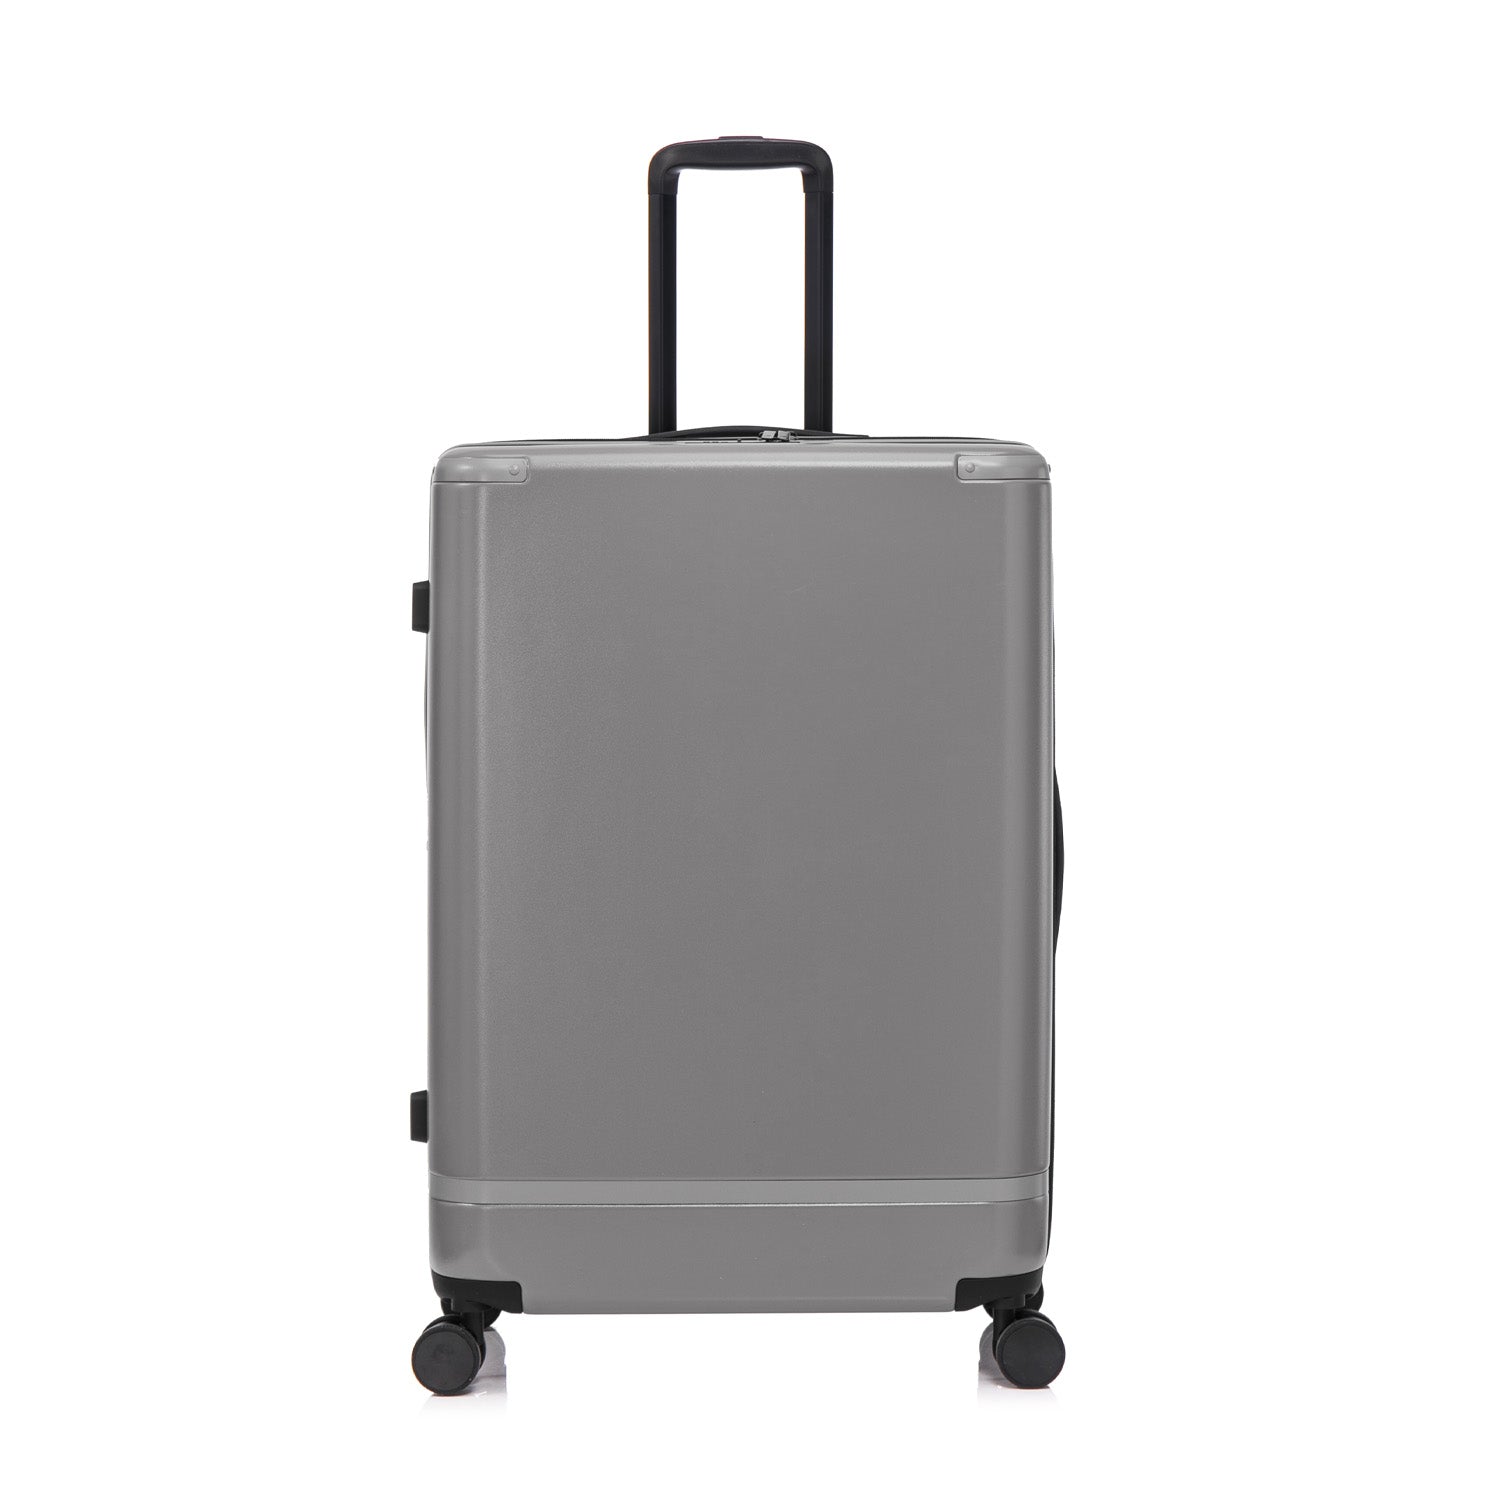 Qantas- QF250 ROME 76cm Large spinner suitcase - Charcoal